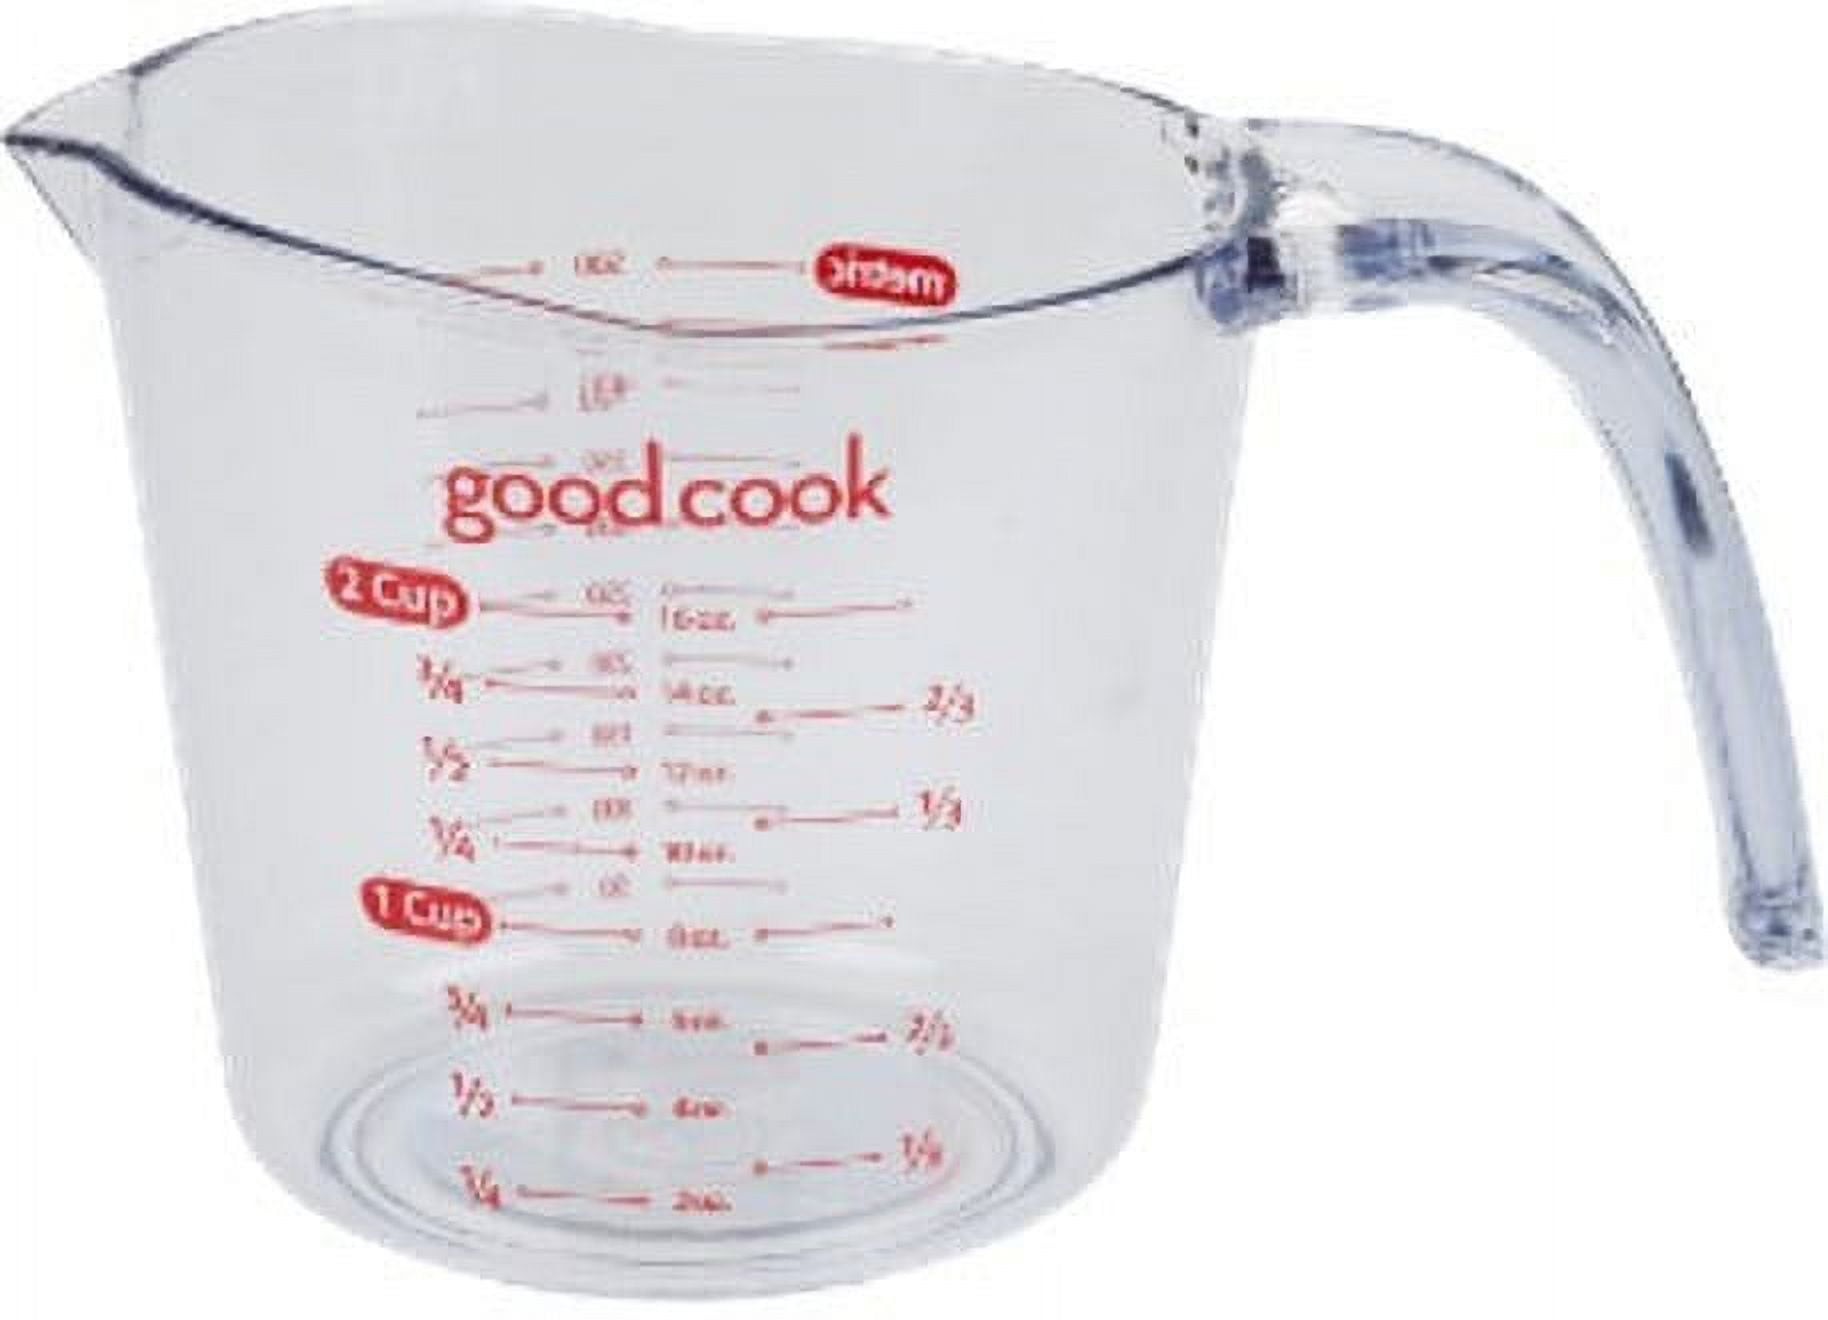 Color Up Premium 2 Cup Measuring Cup (480ml) - Stainless Steel, One-Piece Construction, Dishwasher Safe, Accurate for Wet & Dry Ingredients – One